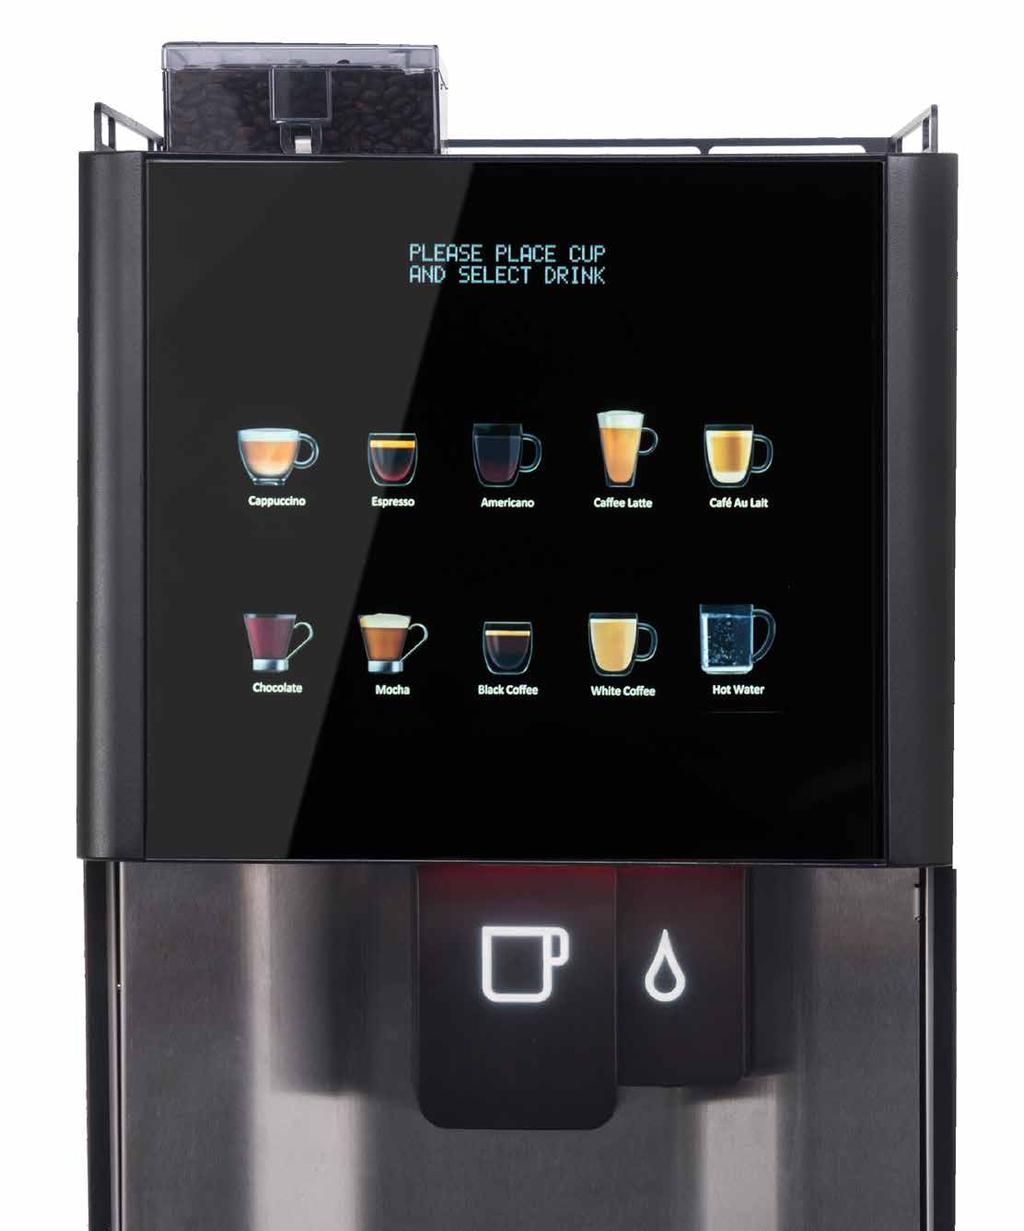 The high pressure brewing system and twin coffee pouring spout ensures that the highest standards of coffee are reached. A leaf tea brewing system delivers exceptional freshly brewed tea.